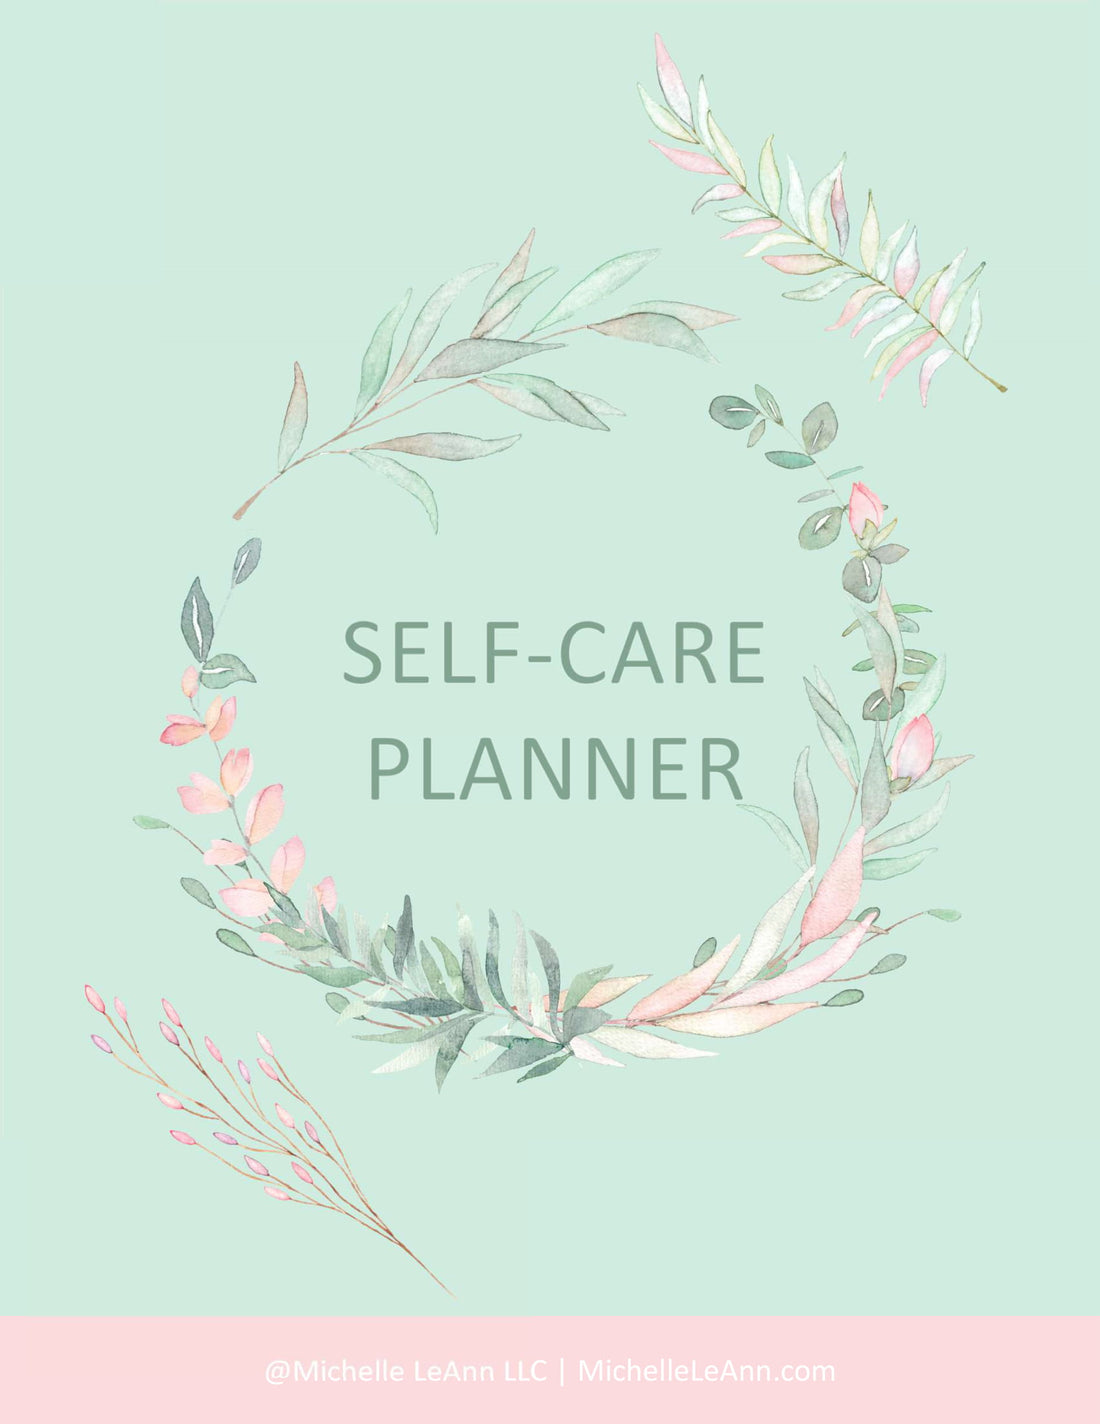 Plan Your Selfcare